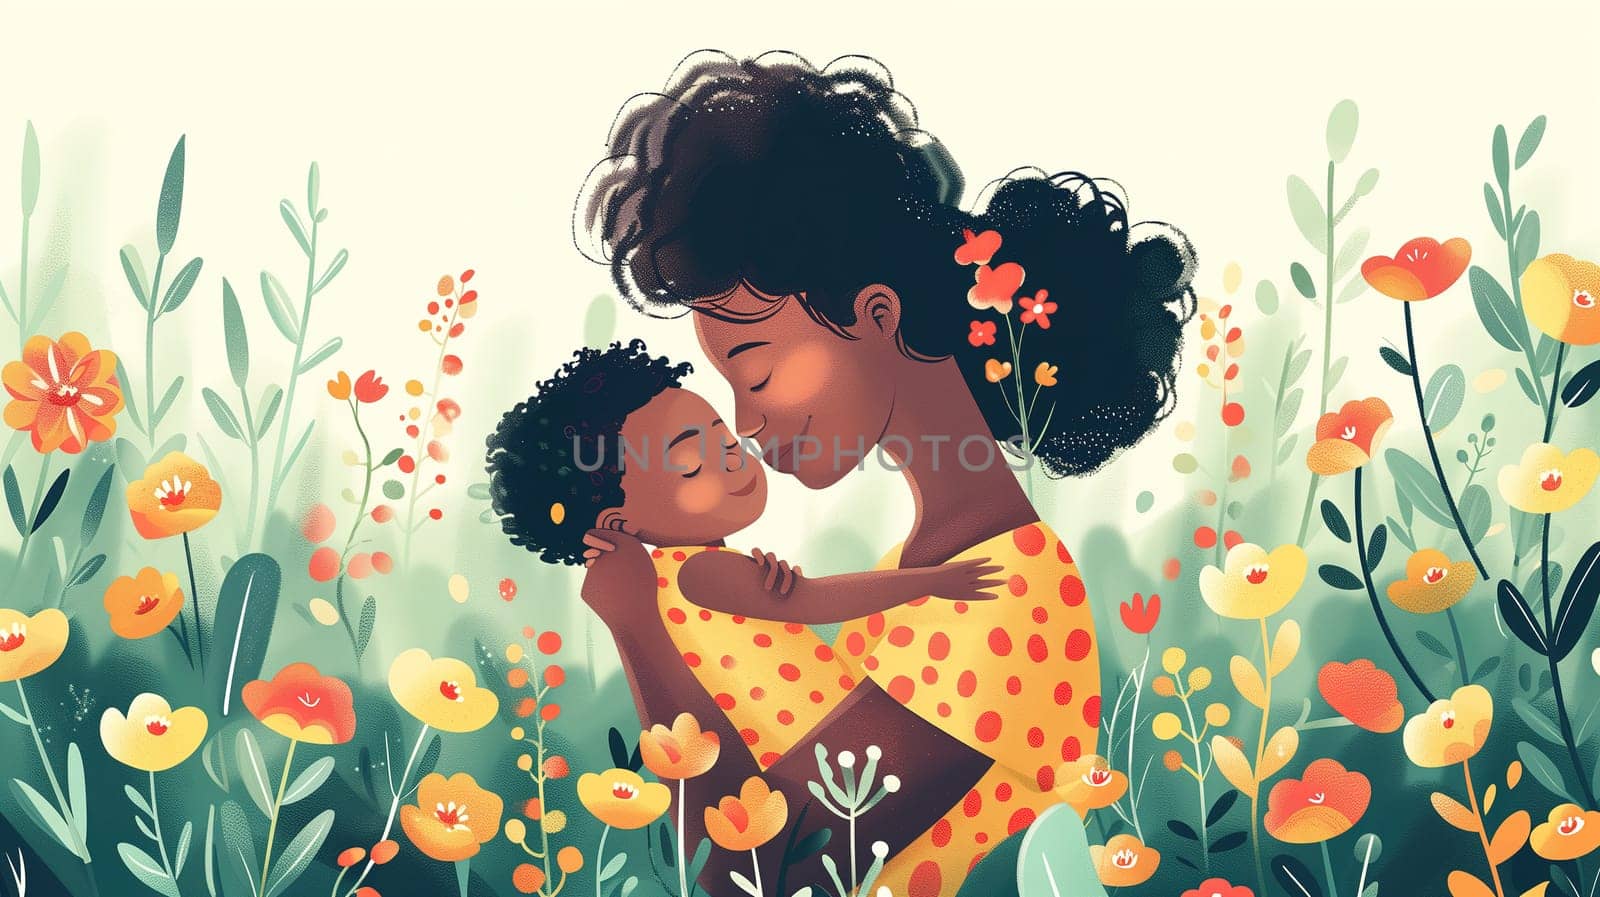 A woman is standing in a field of colorful flowers, holding a small child in her arms. The sun shines brightly overhead as they enjoy the beauty of nature together.